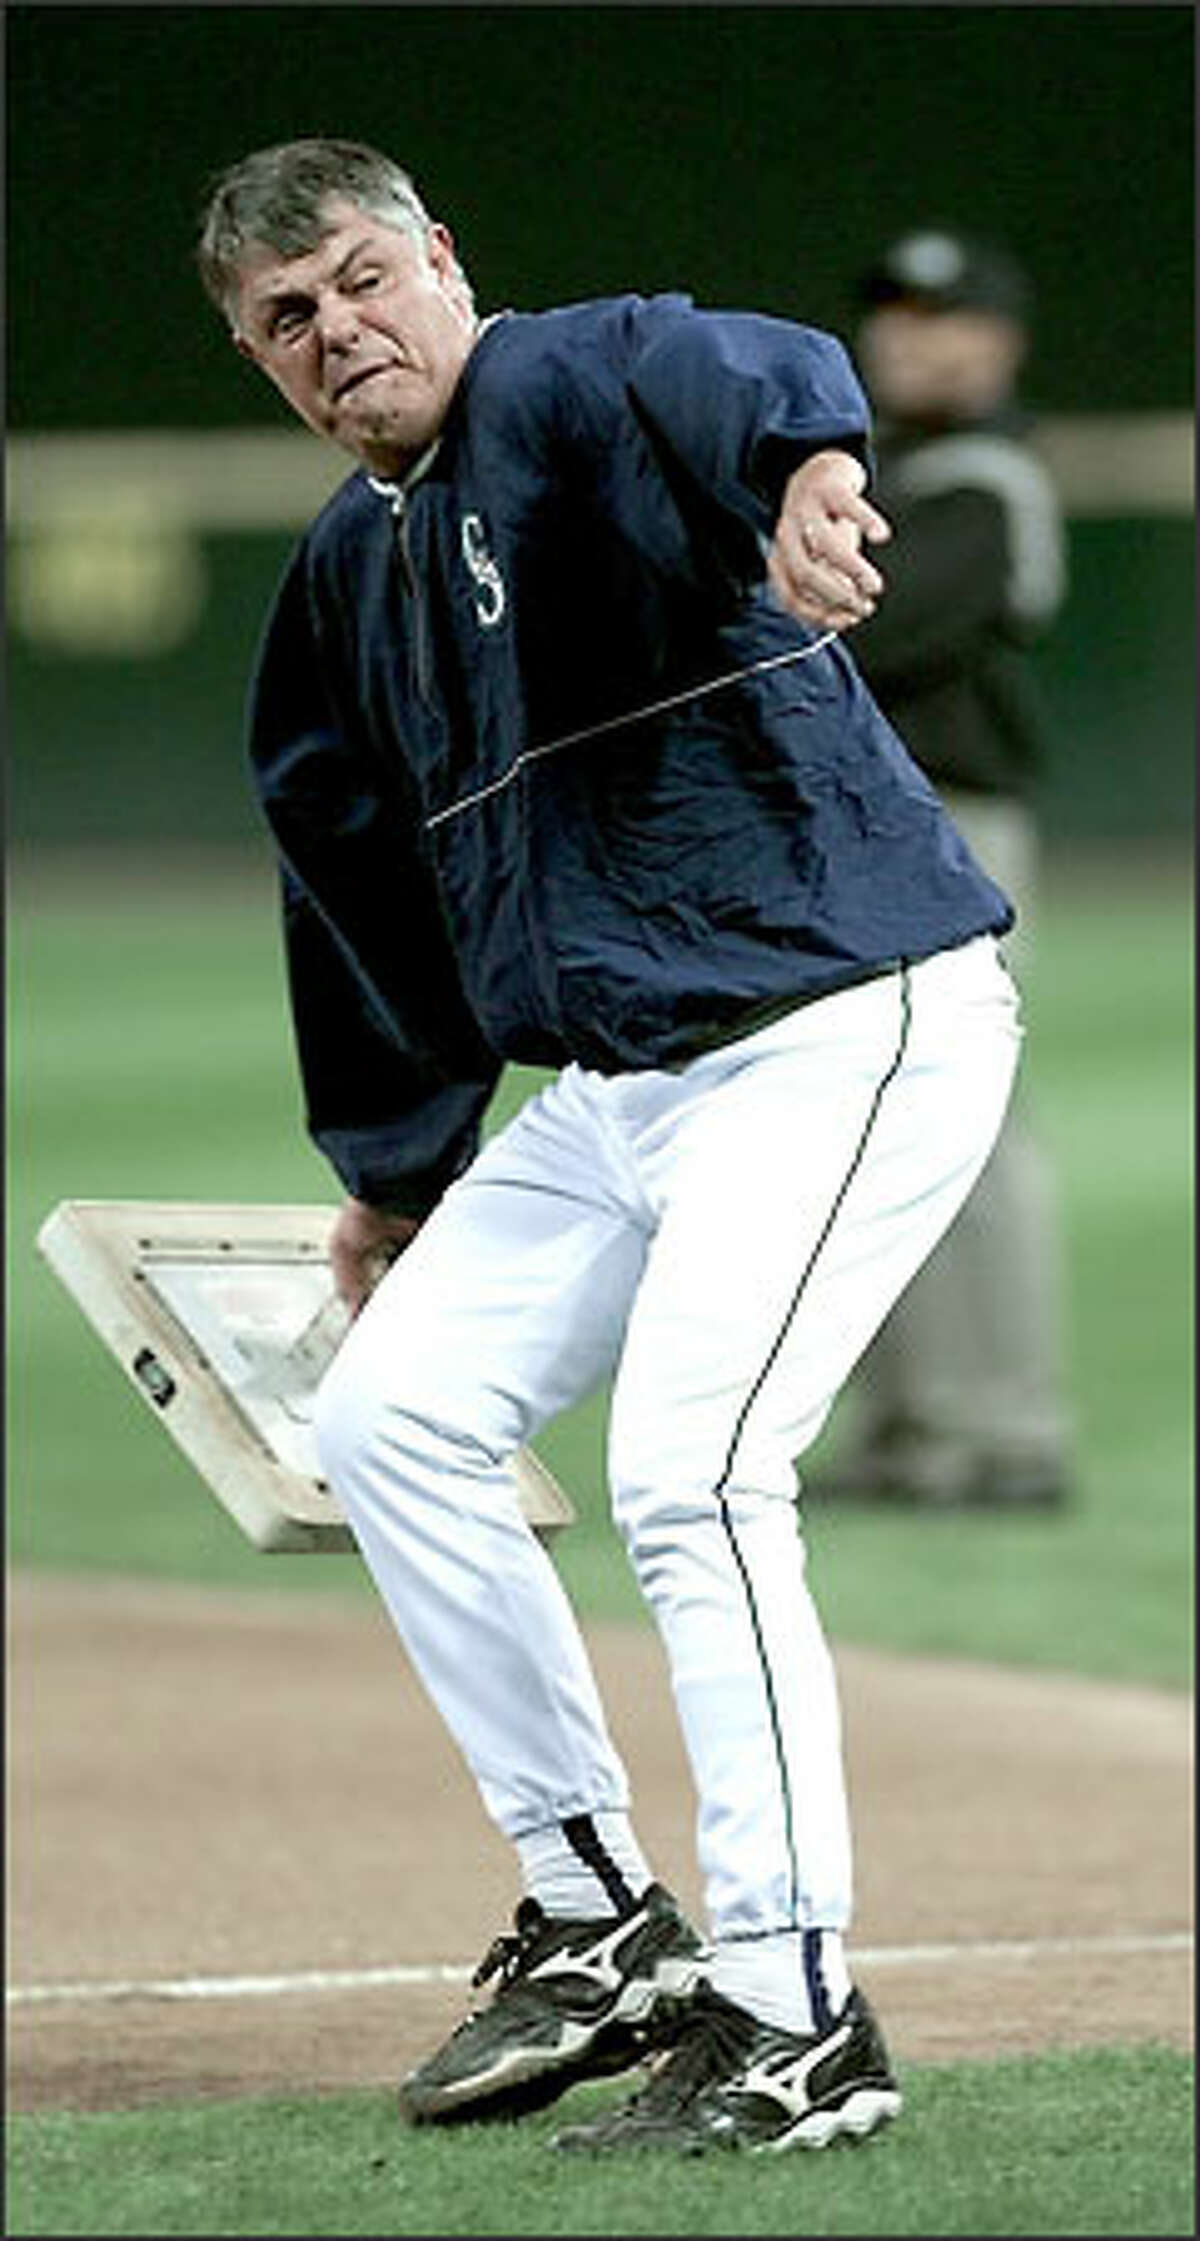 Mariners manager Lou Piniella throws first base in a fit of utter rage during a game against Texas on Sept. 18 at Safeco Field. Piniella went nuts after a bad call and an ensuing "smirk" from the first-base umpire.